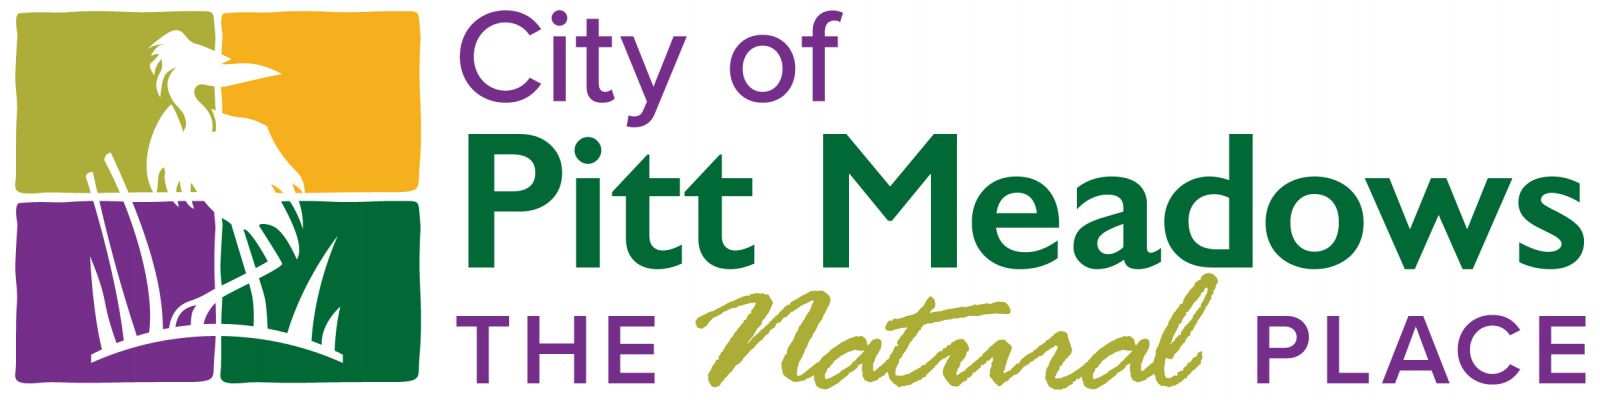 Image for Council Accepts Registrar of Companies Outcome of the Pitt Meadows Community Foundation Review